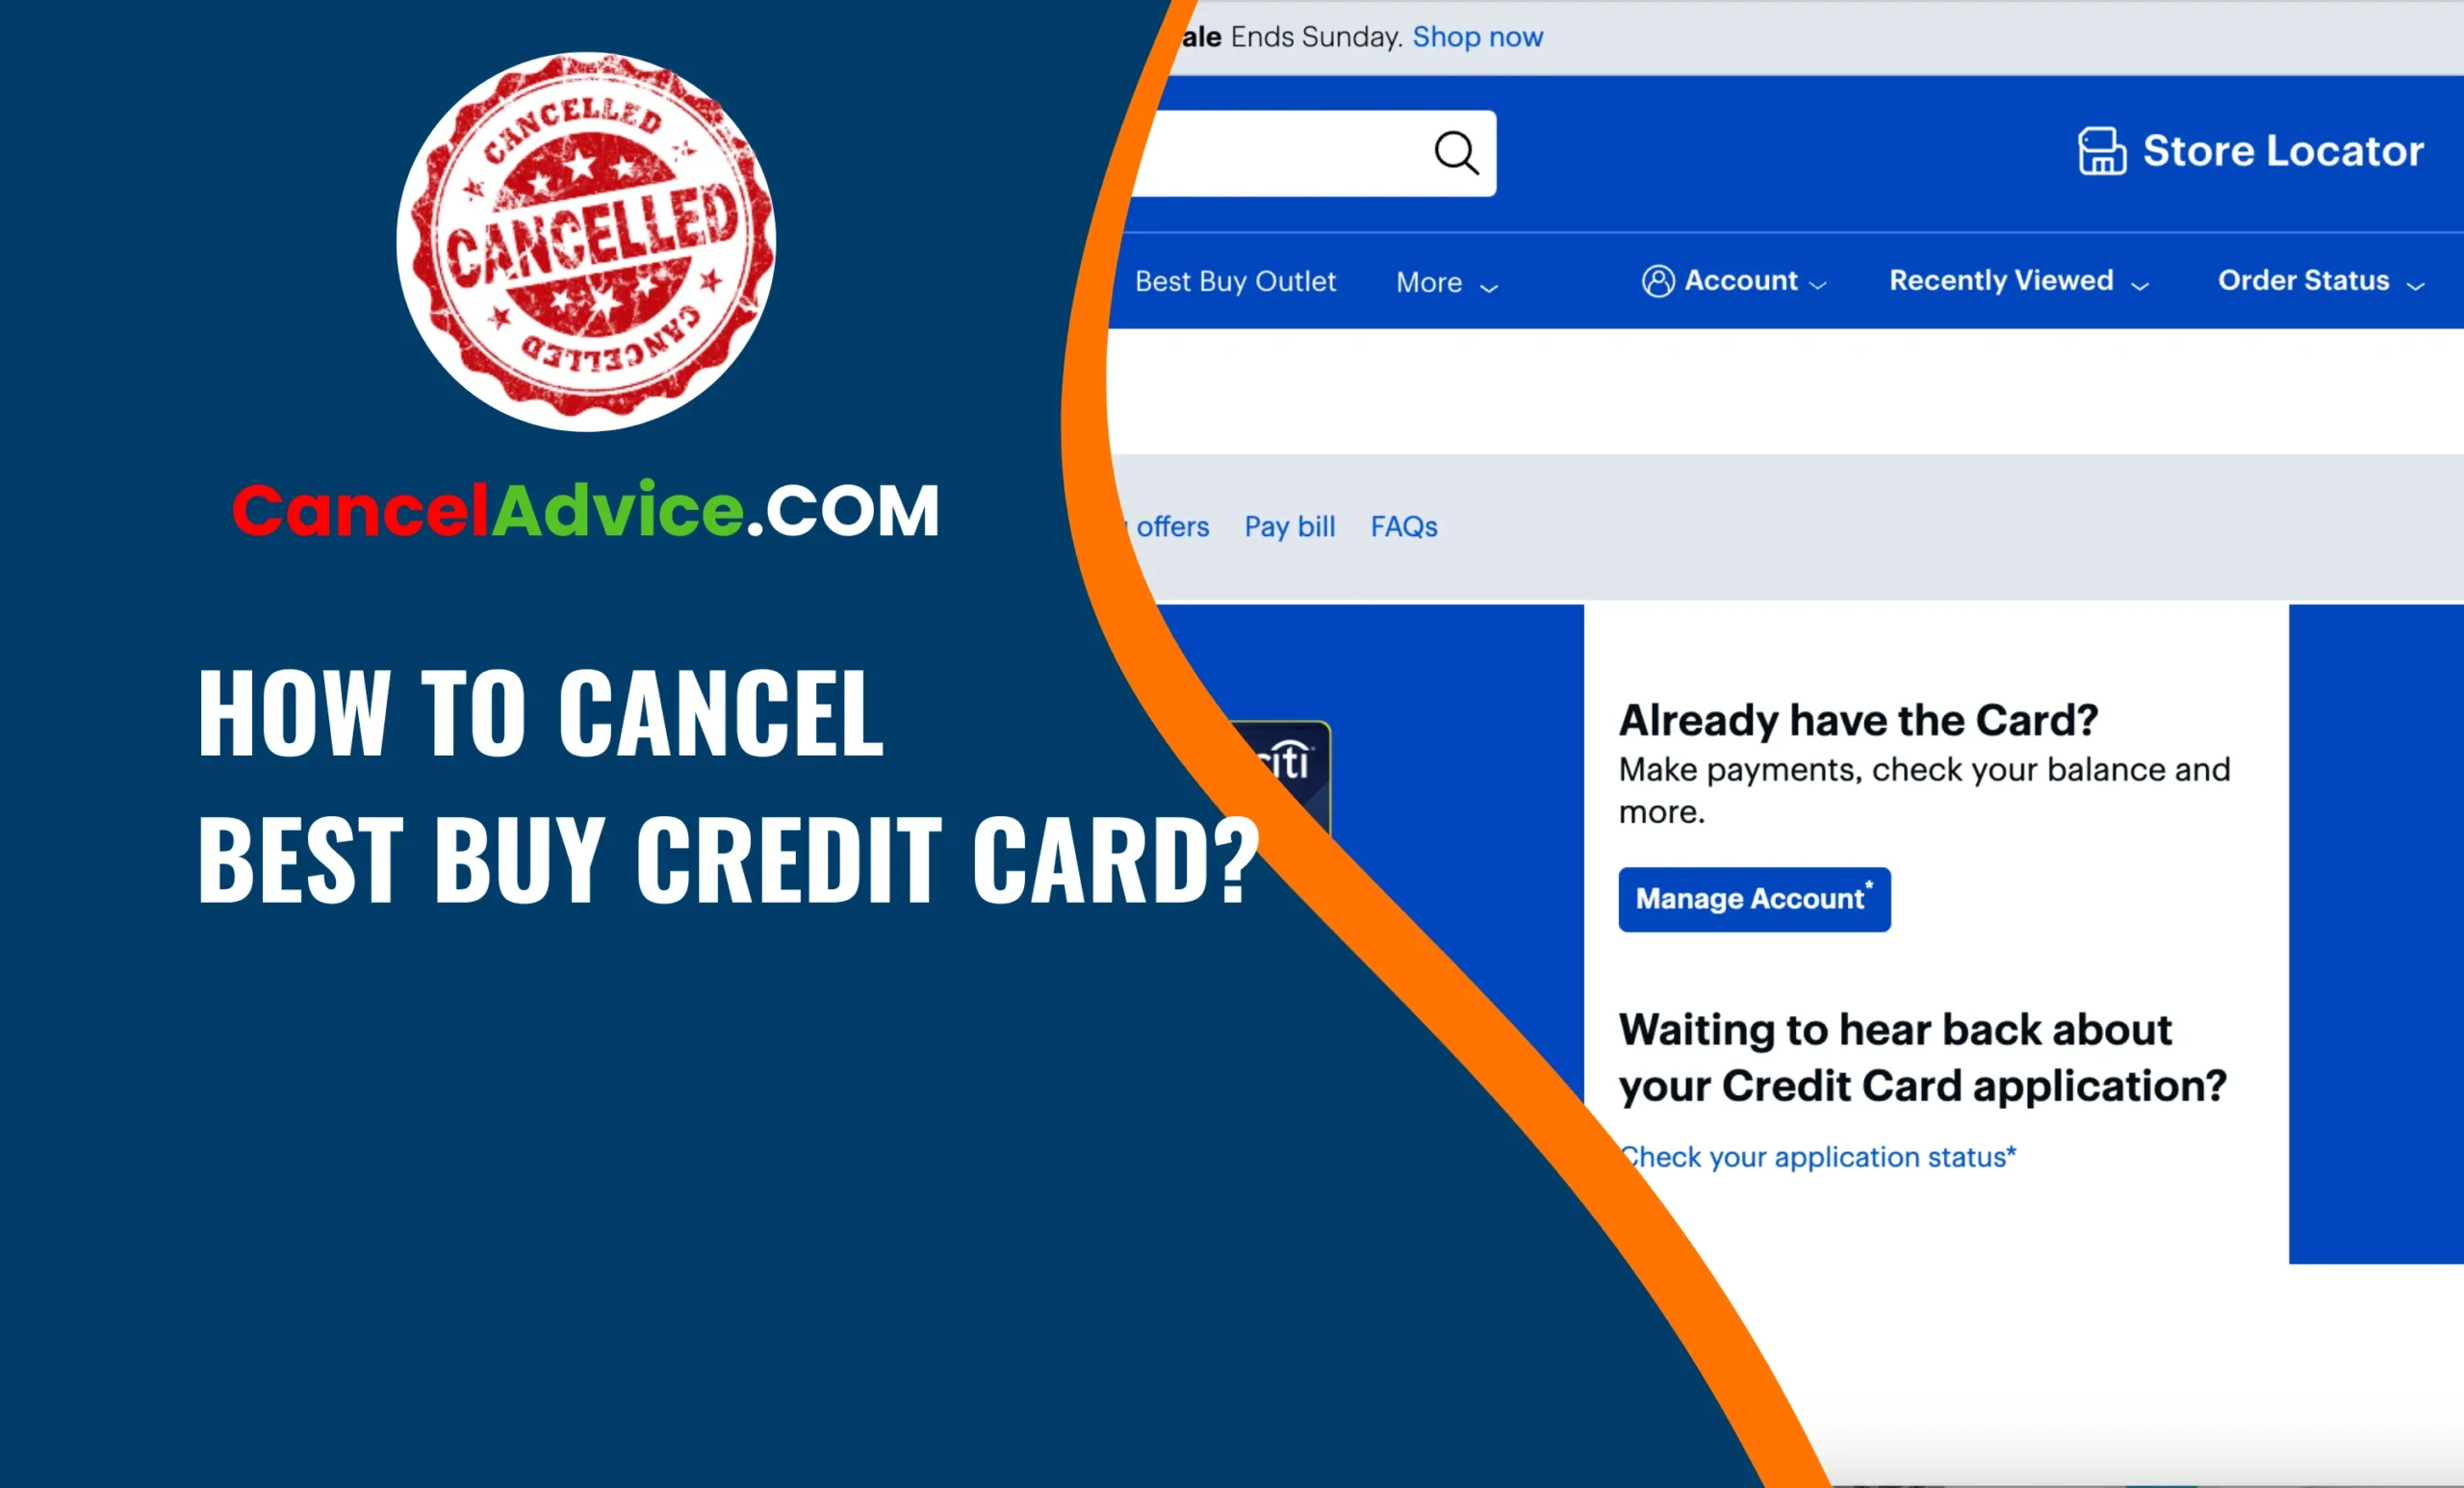 How to Cancel Best Buy Credit Card